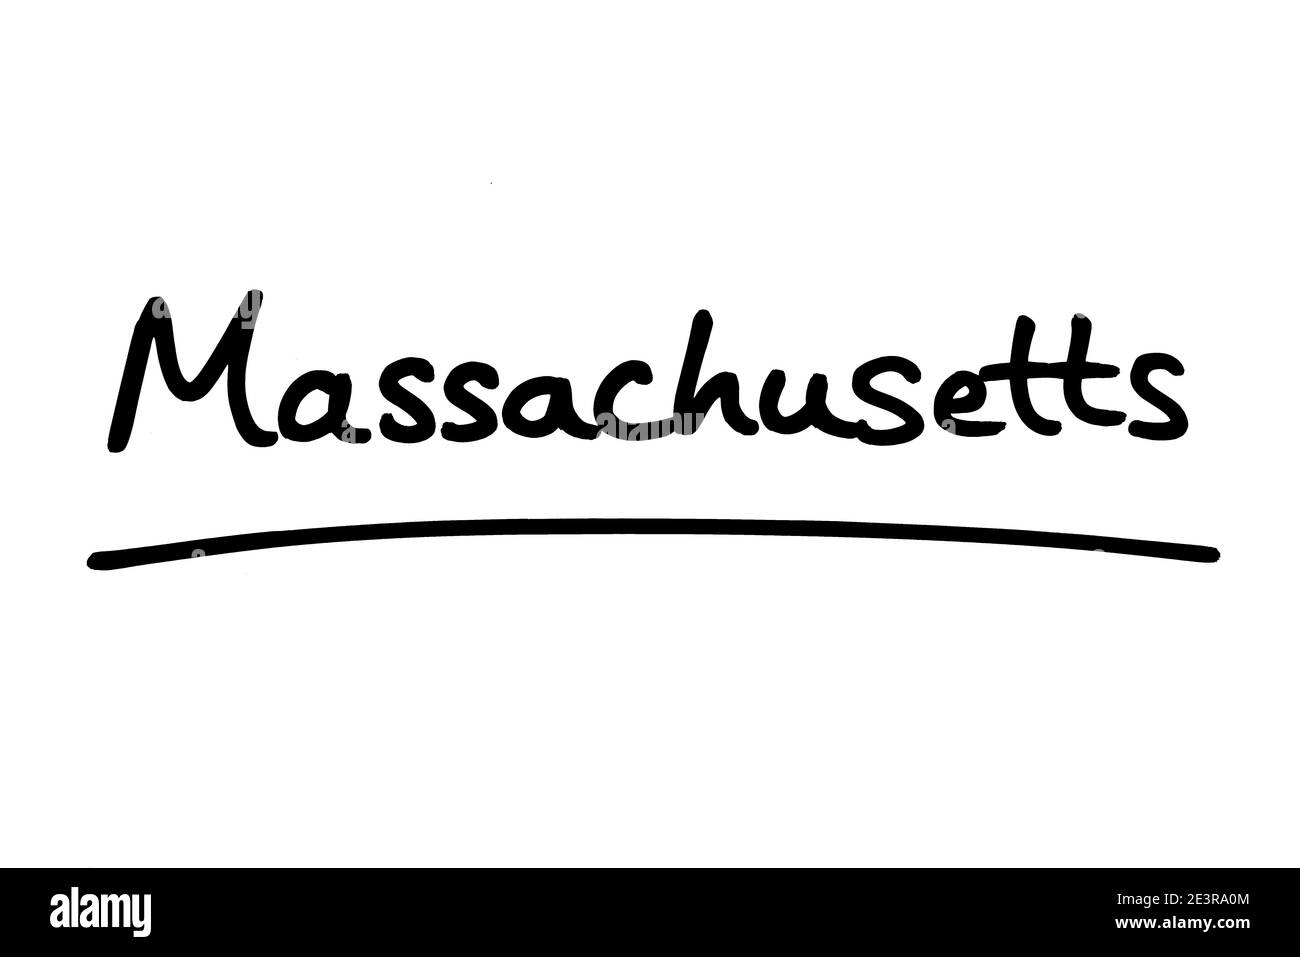 Massachusetts - a state in the United States of America, handwritten on a white background. Stock Photo